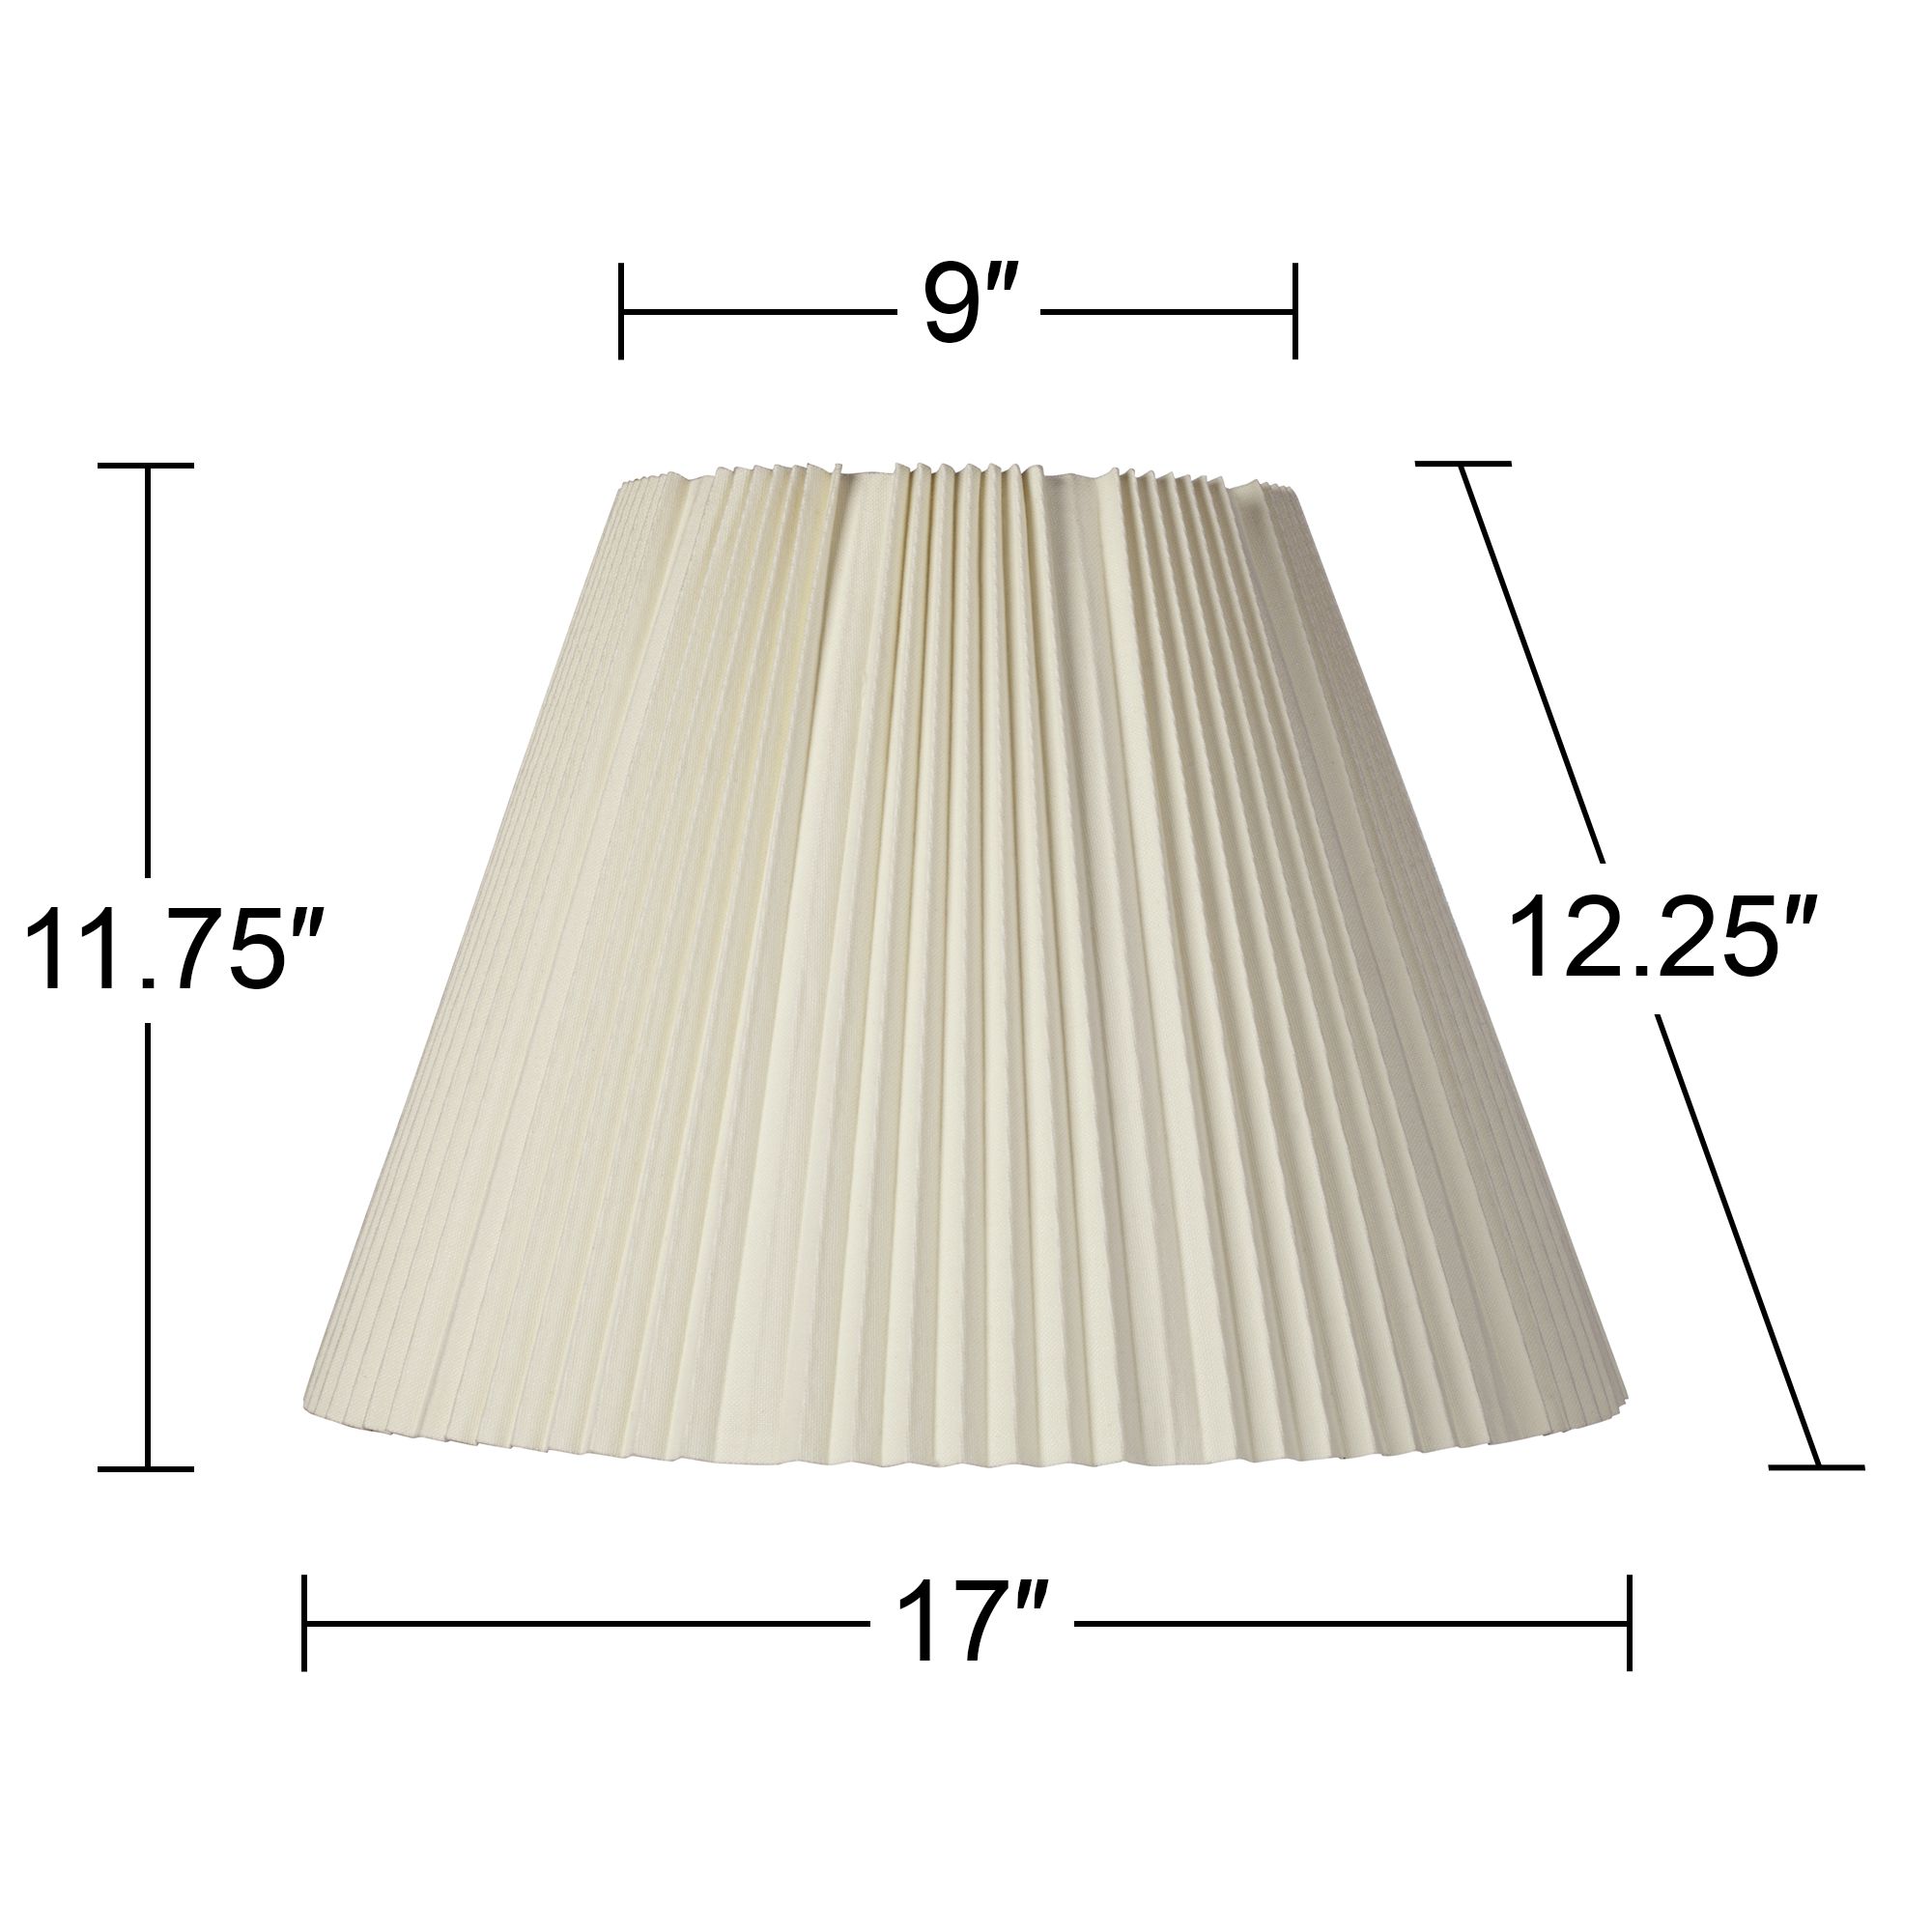 Springcrest Eggshell Pleated Large Empire Lamp Shade 9" Top x 17" Bottom x 11.75" High x 12.25" Slant (Spider) Replacement with Harp and Finial - image 4 of 6